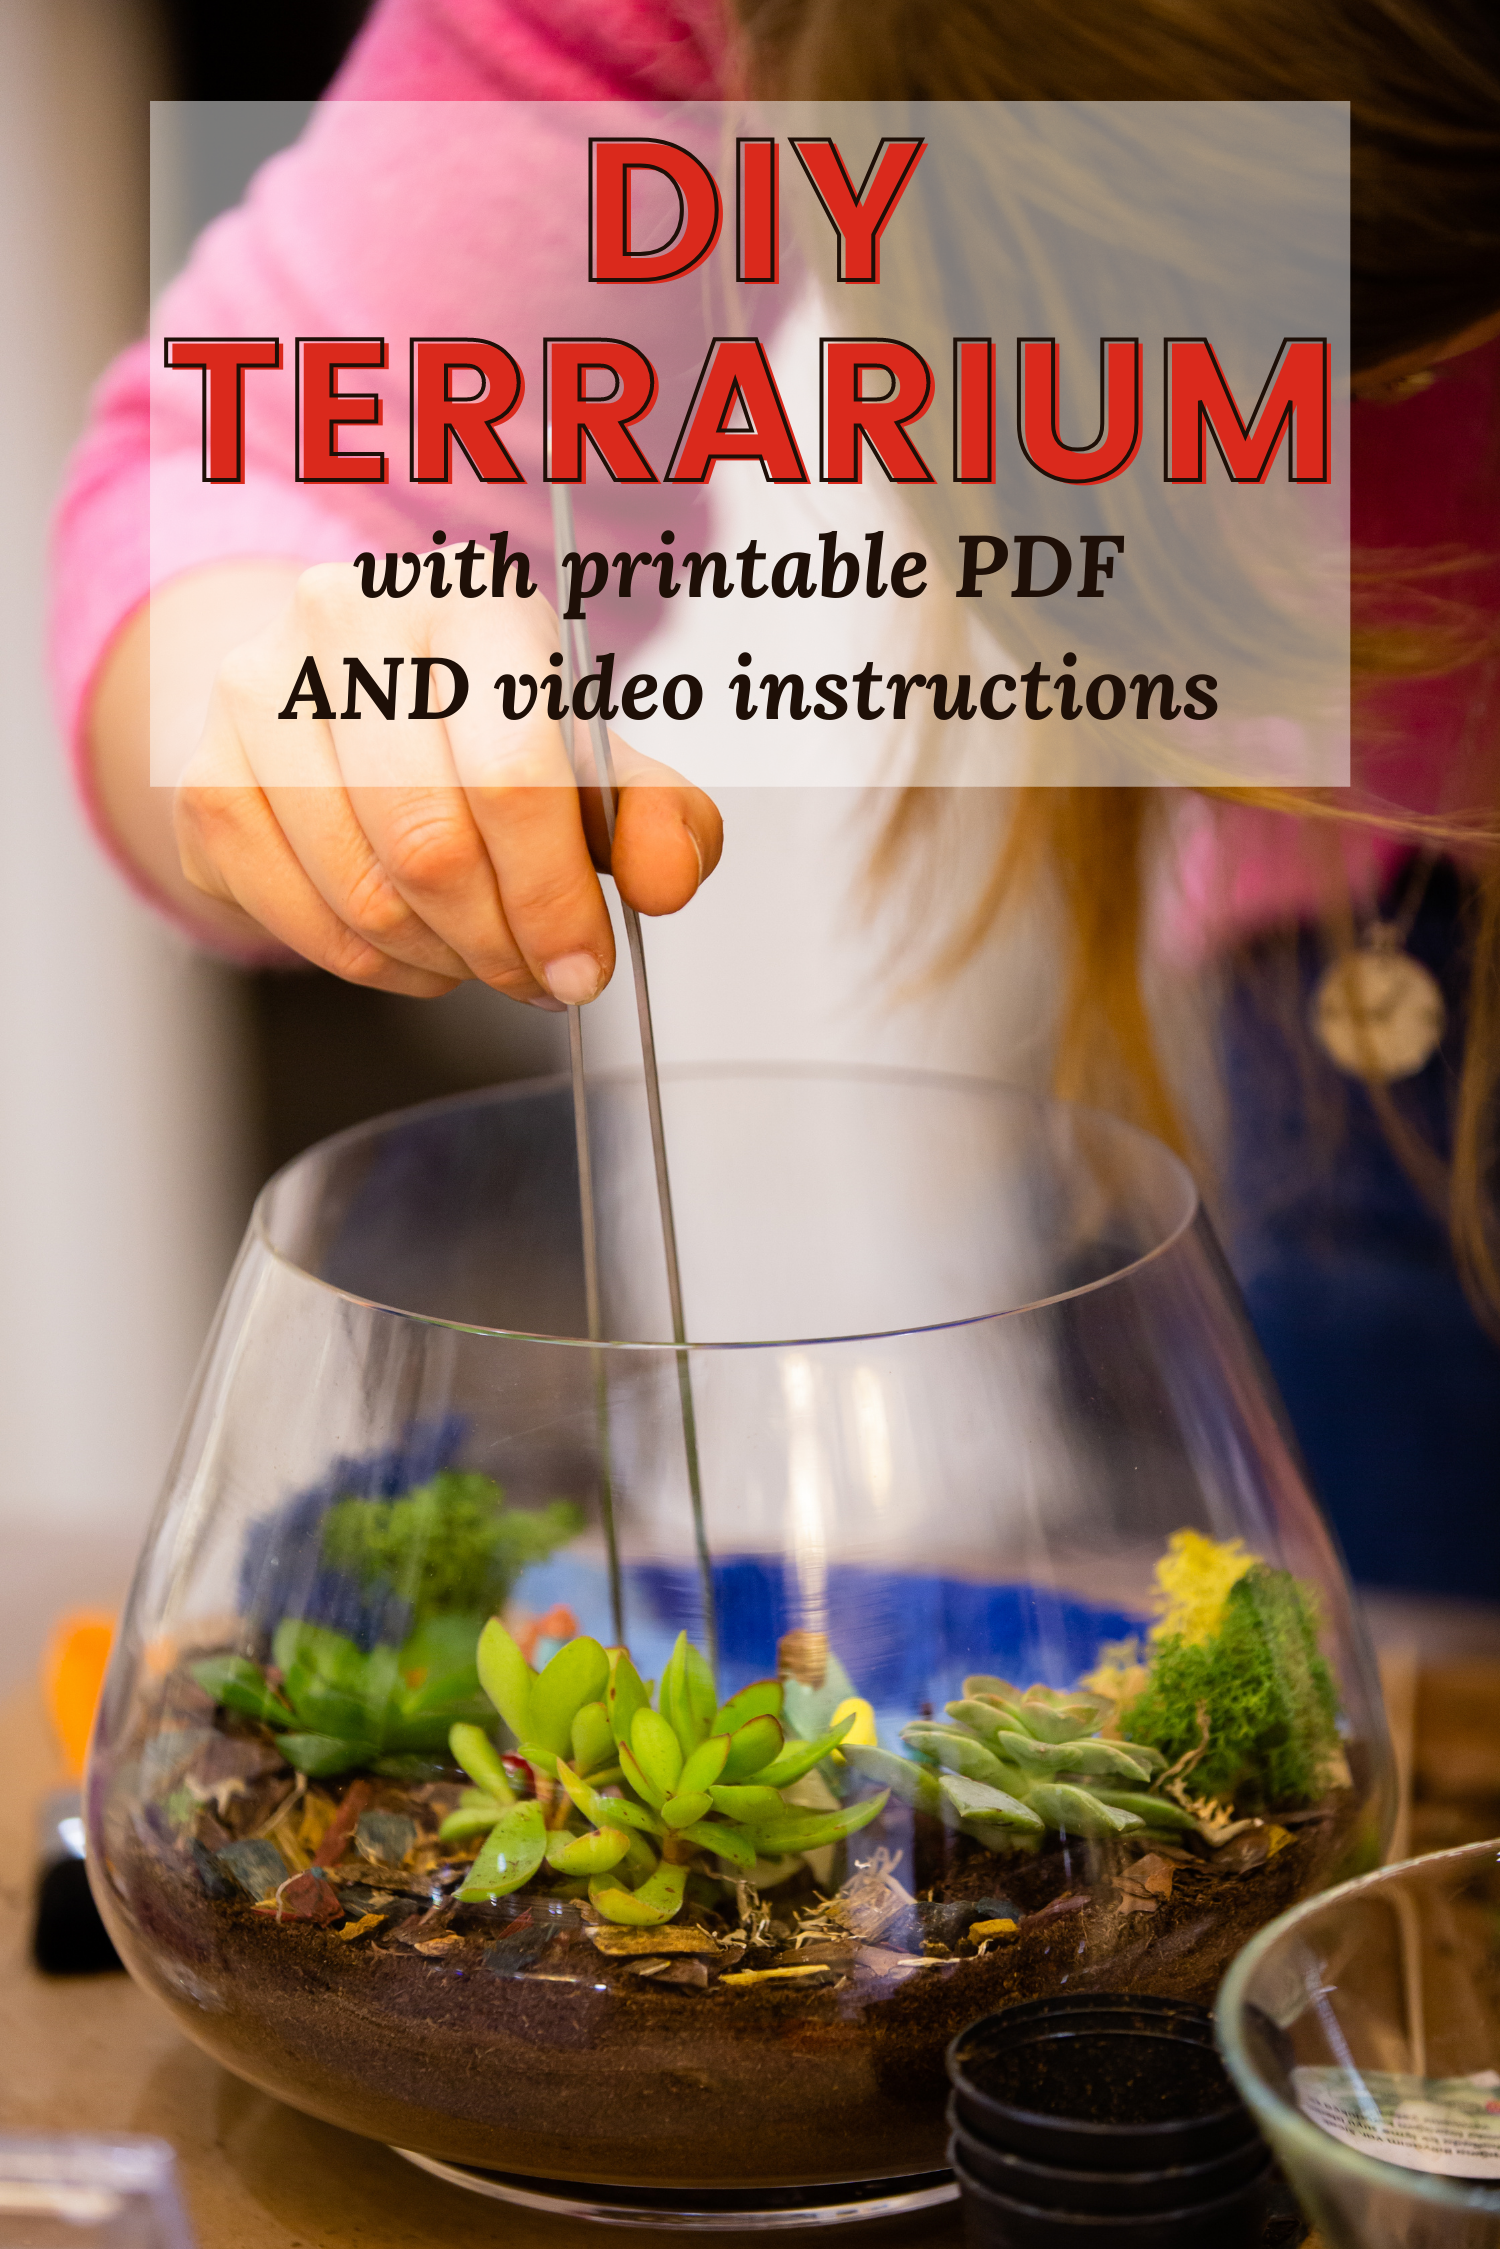 How To Plant A Terrarium-- A Video Guide To Planting An Indoor Terrarium